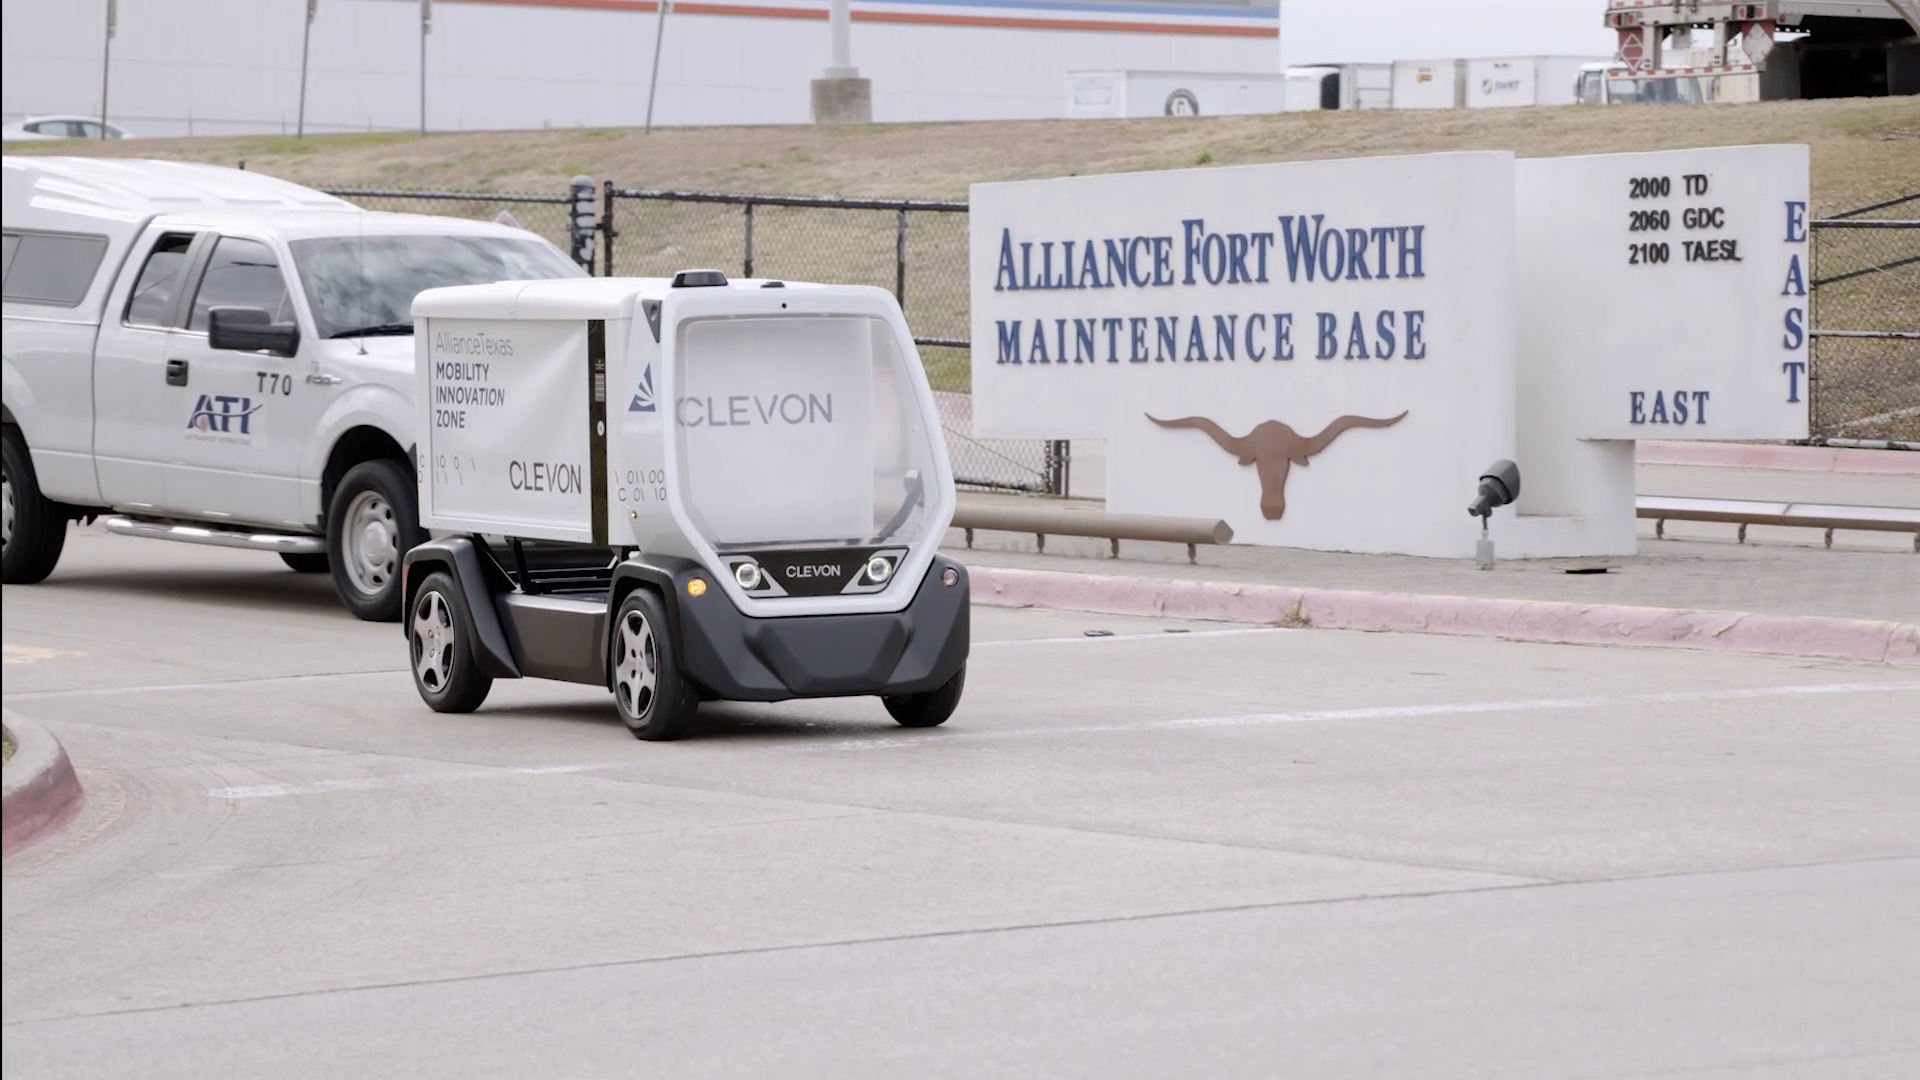 CLEVON 1, Clevon's flagship multi-platform all-electric robot courier, delivered gourmet meals from O’Neill’s Inflight Catering to Alliance Aviation Services team members in the new, fixed-based operation (FBO) facility at Perot Field Fort Worth Alliance Airport in Fort Worth, Texas. Clevon moved its U.S. headquarters to the AllianceTexas Mobility Innovation Zone (MIZ) in September.